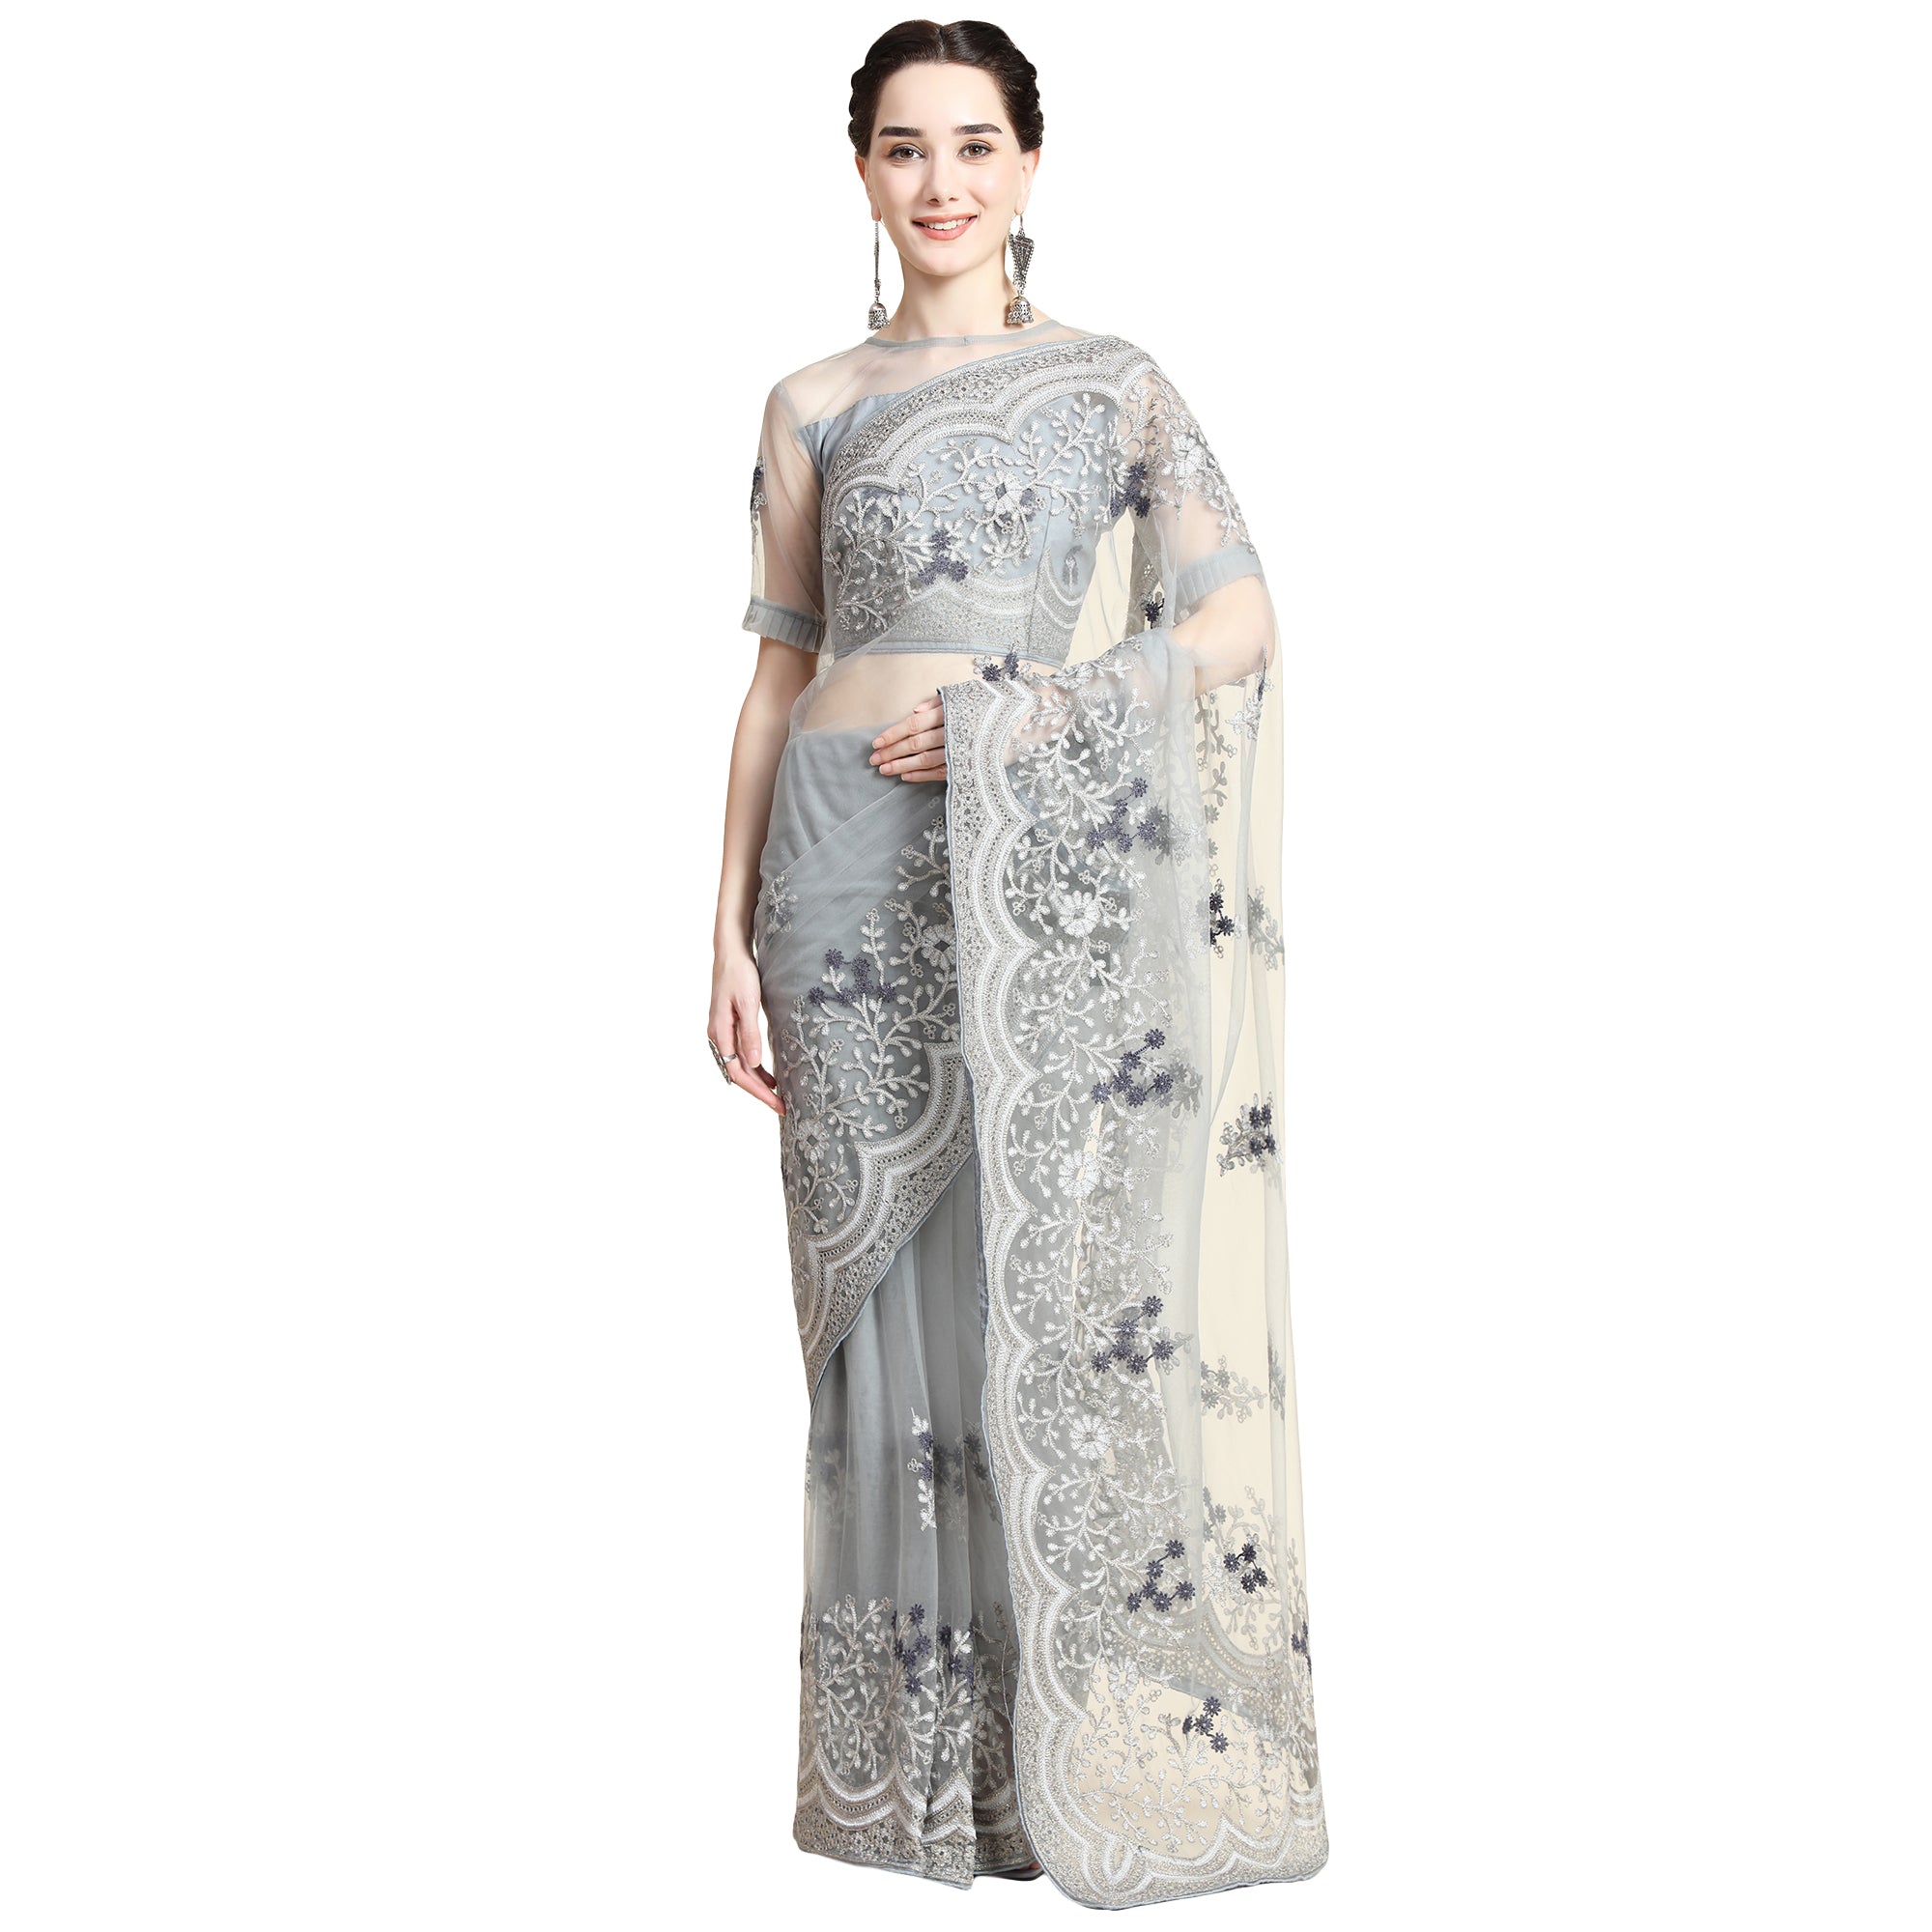 Women's Self Color Thread Embroidery Paty Wear Contemporary Net Saree With Blouse Piece (Grey) - NIMIDHYA